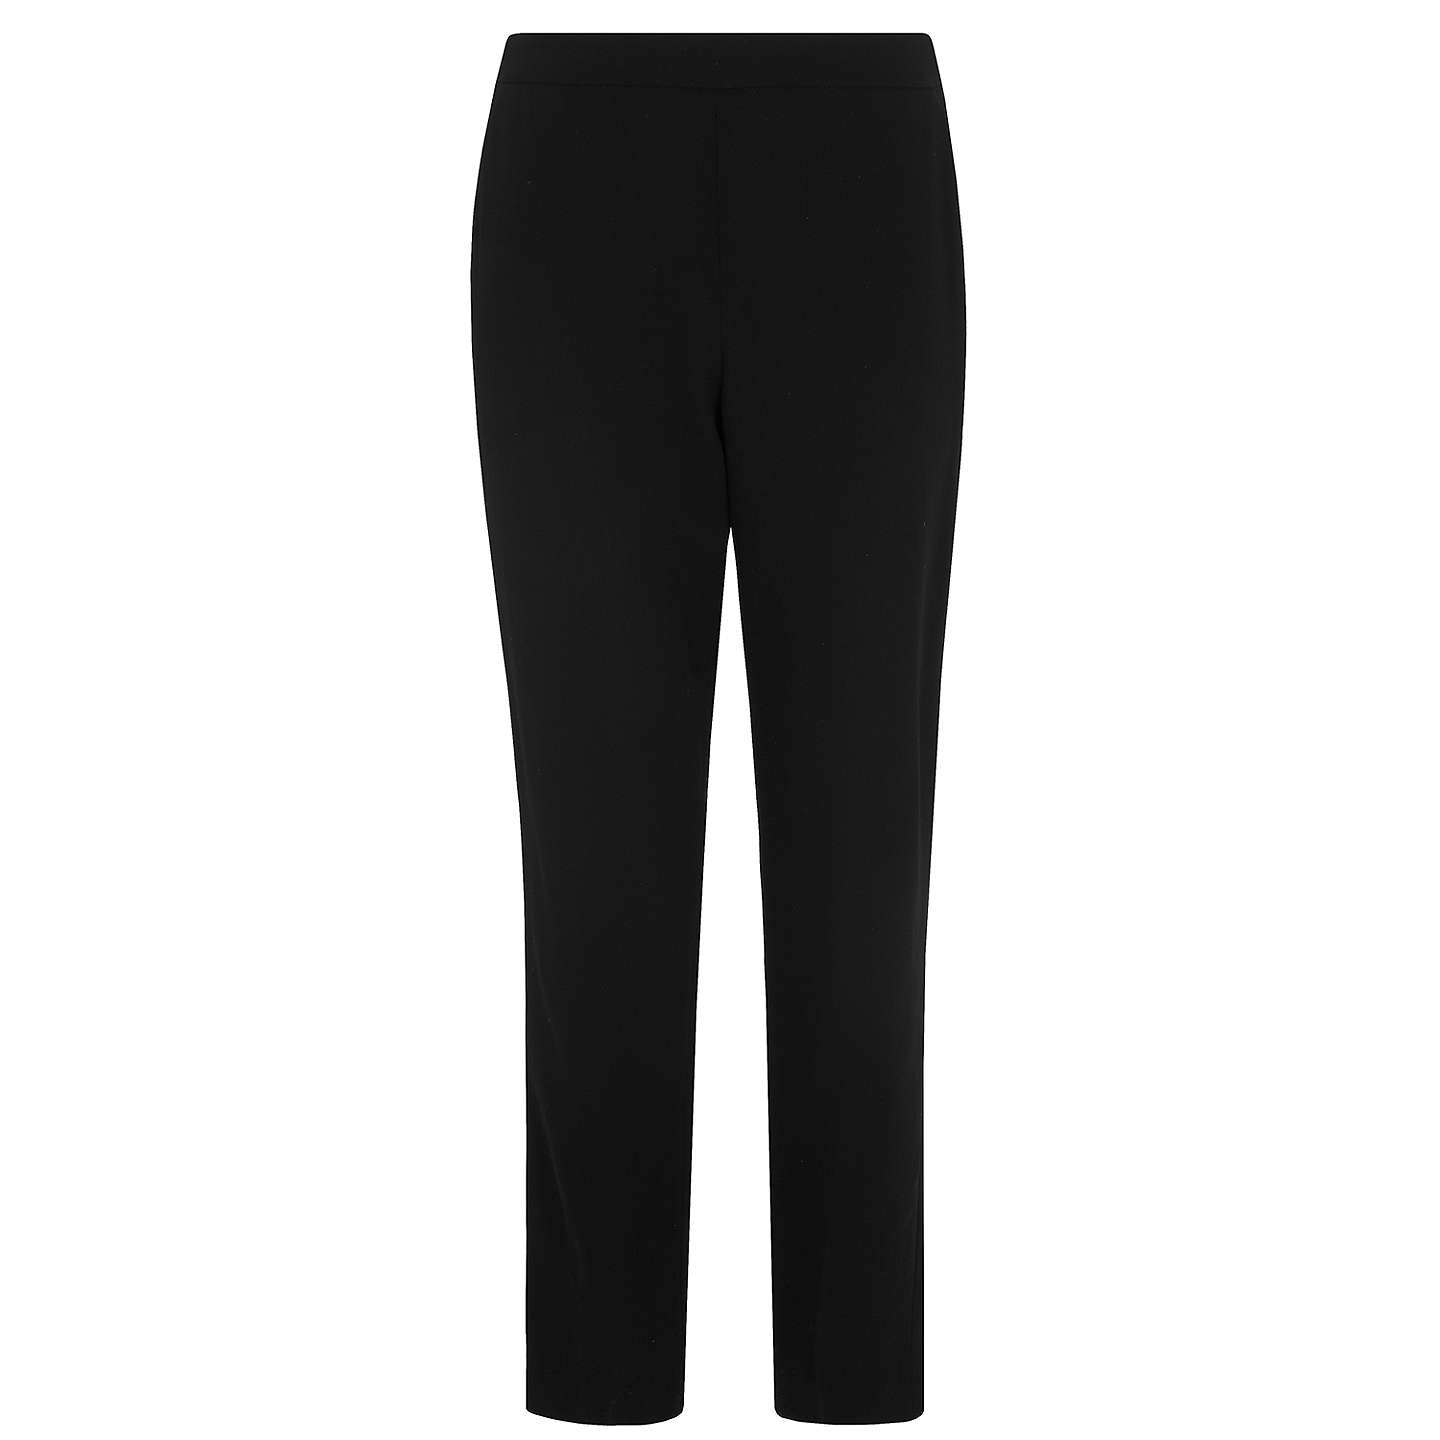 Whistles Anna Elasticated Waist Trousers at John Lewis